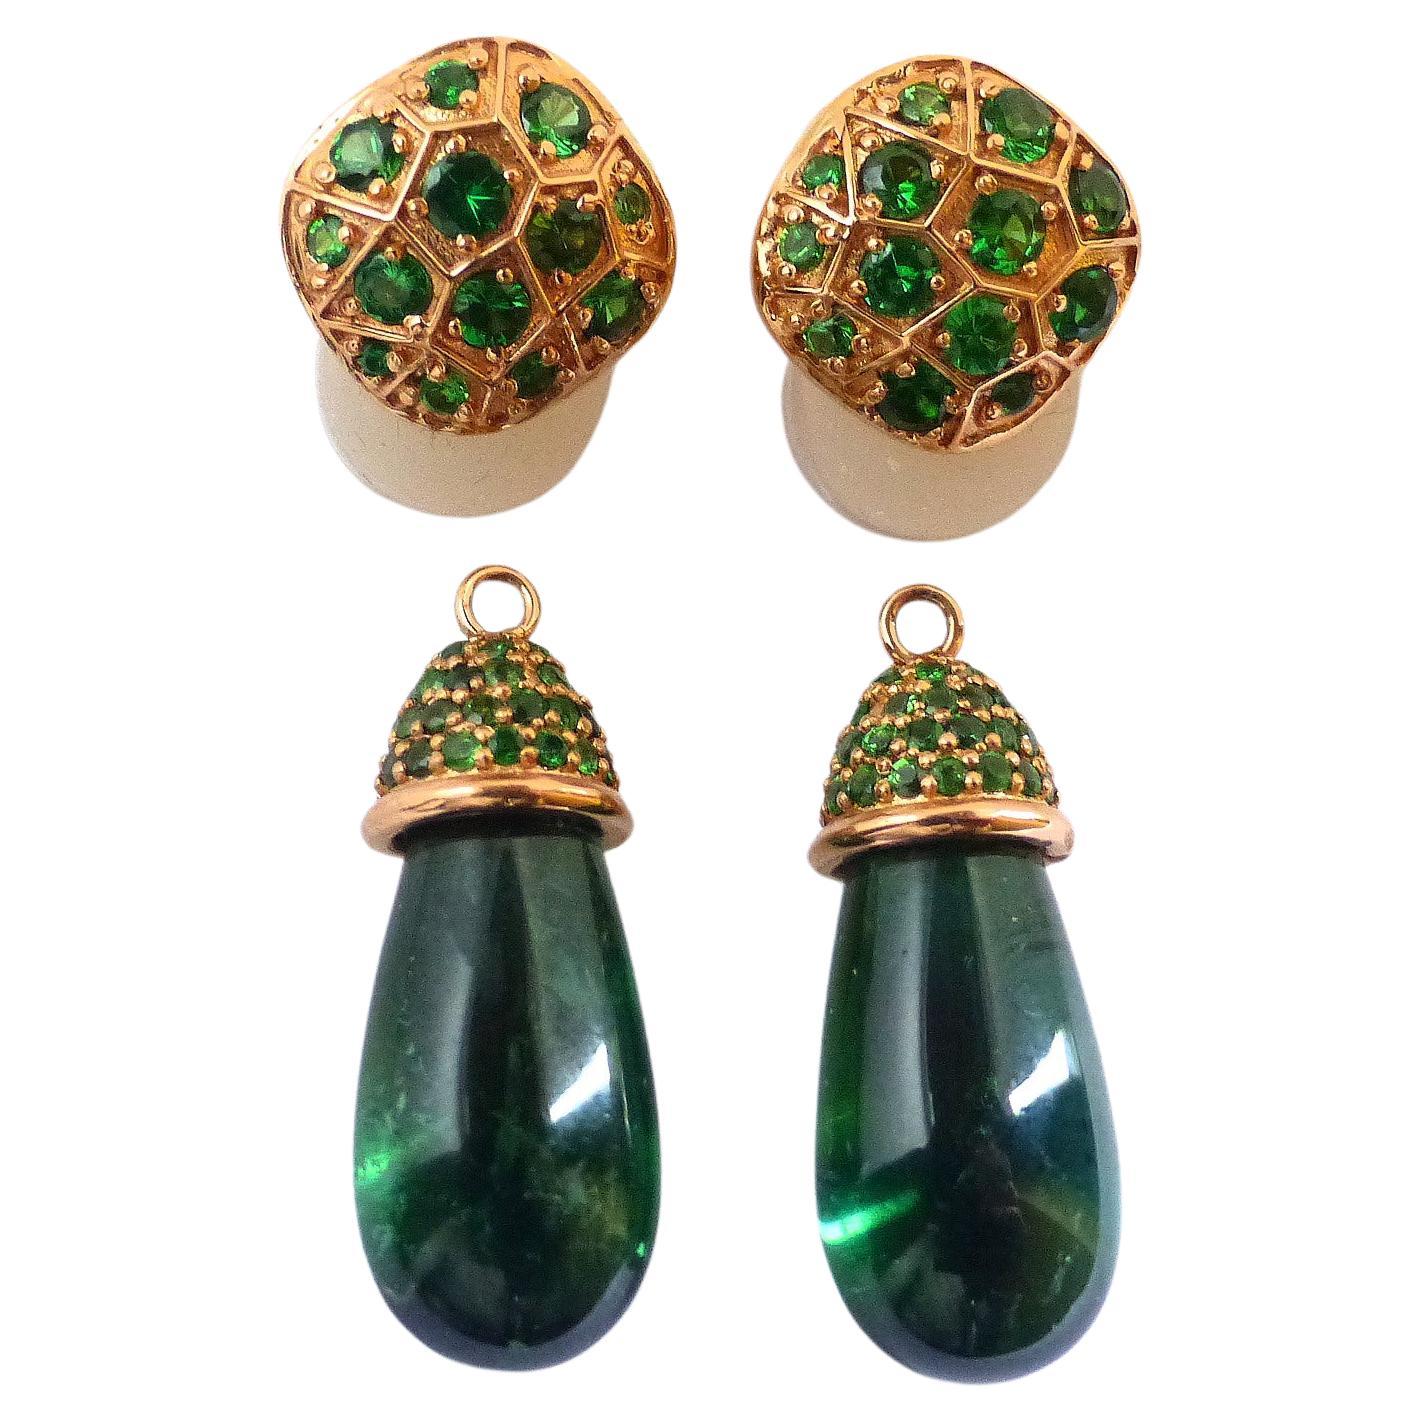 Earrings with 2 green Tourmaline Brioletts 33, 25c. and 96 green Tsavorites 2, 26c For Sale